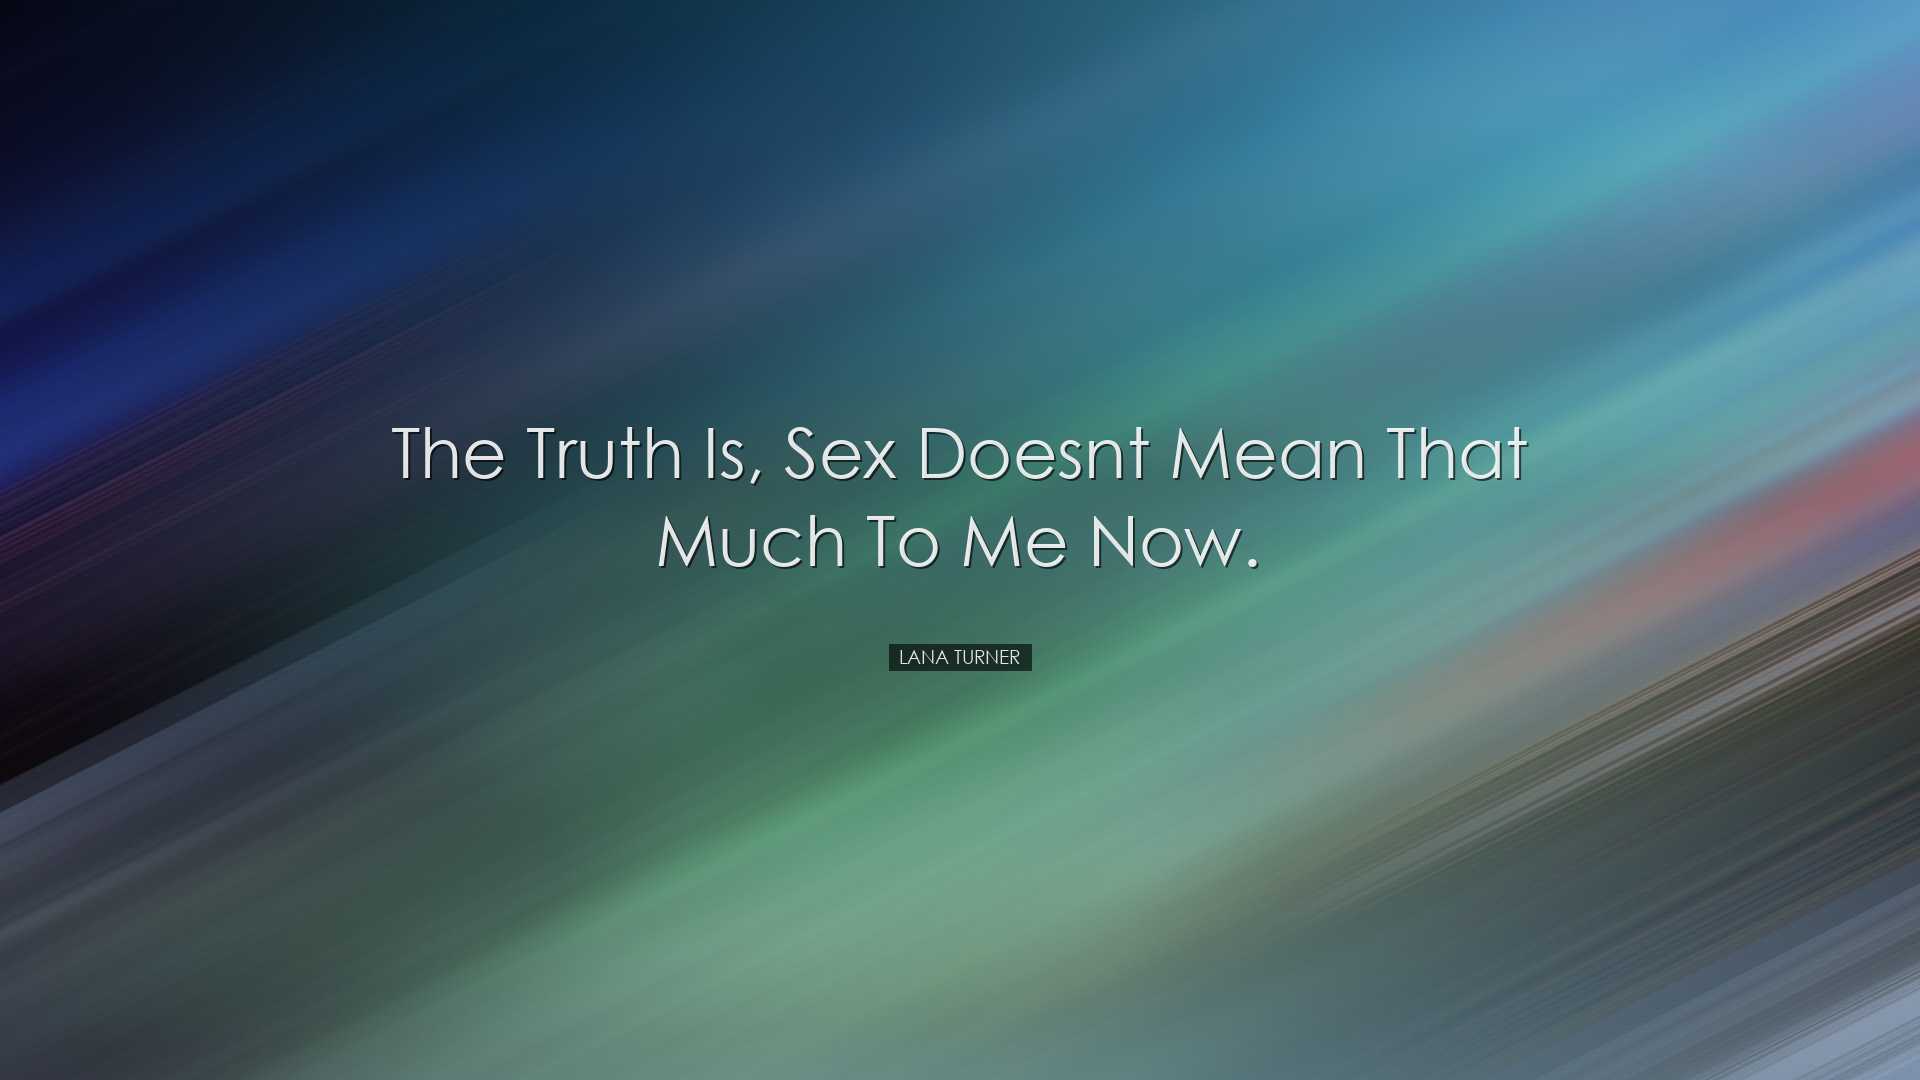 The truth is, sex doesnt mean that much to me now. - Lana Turner